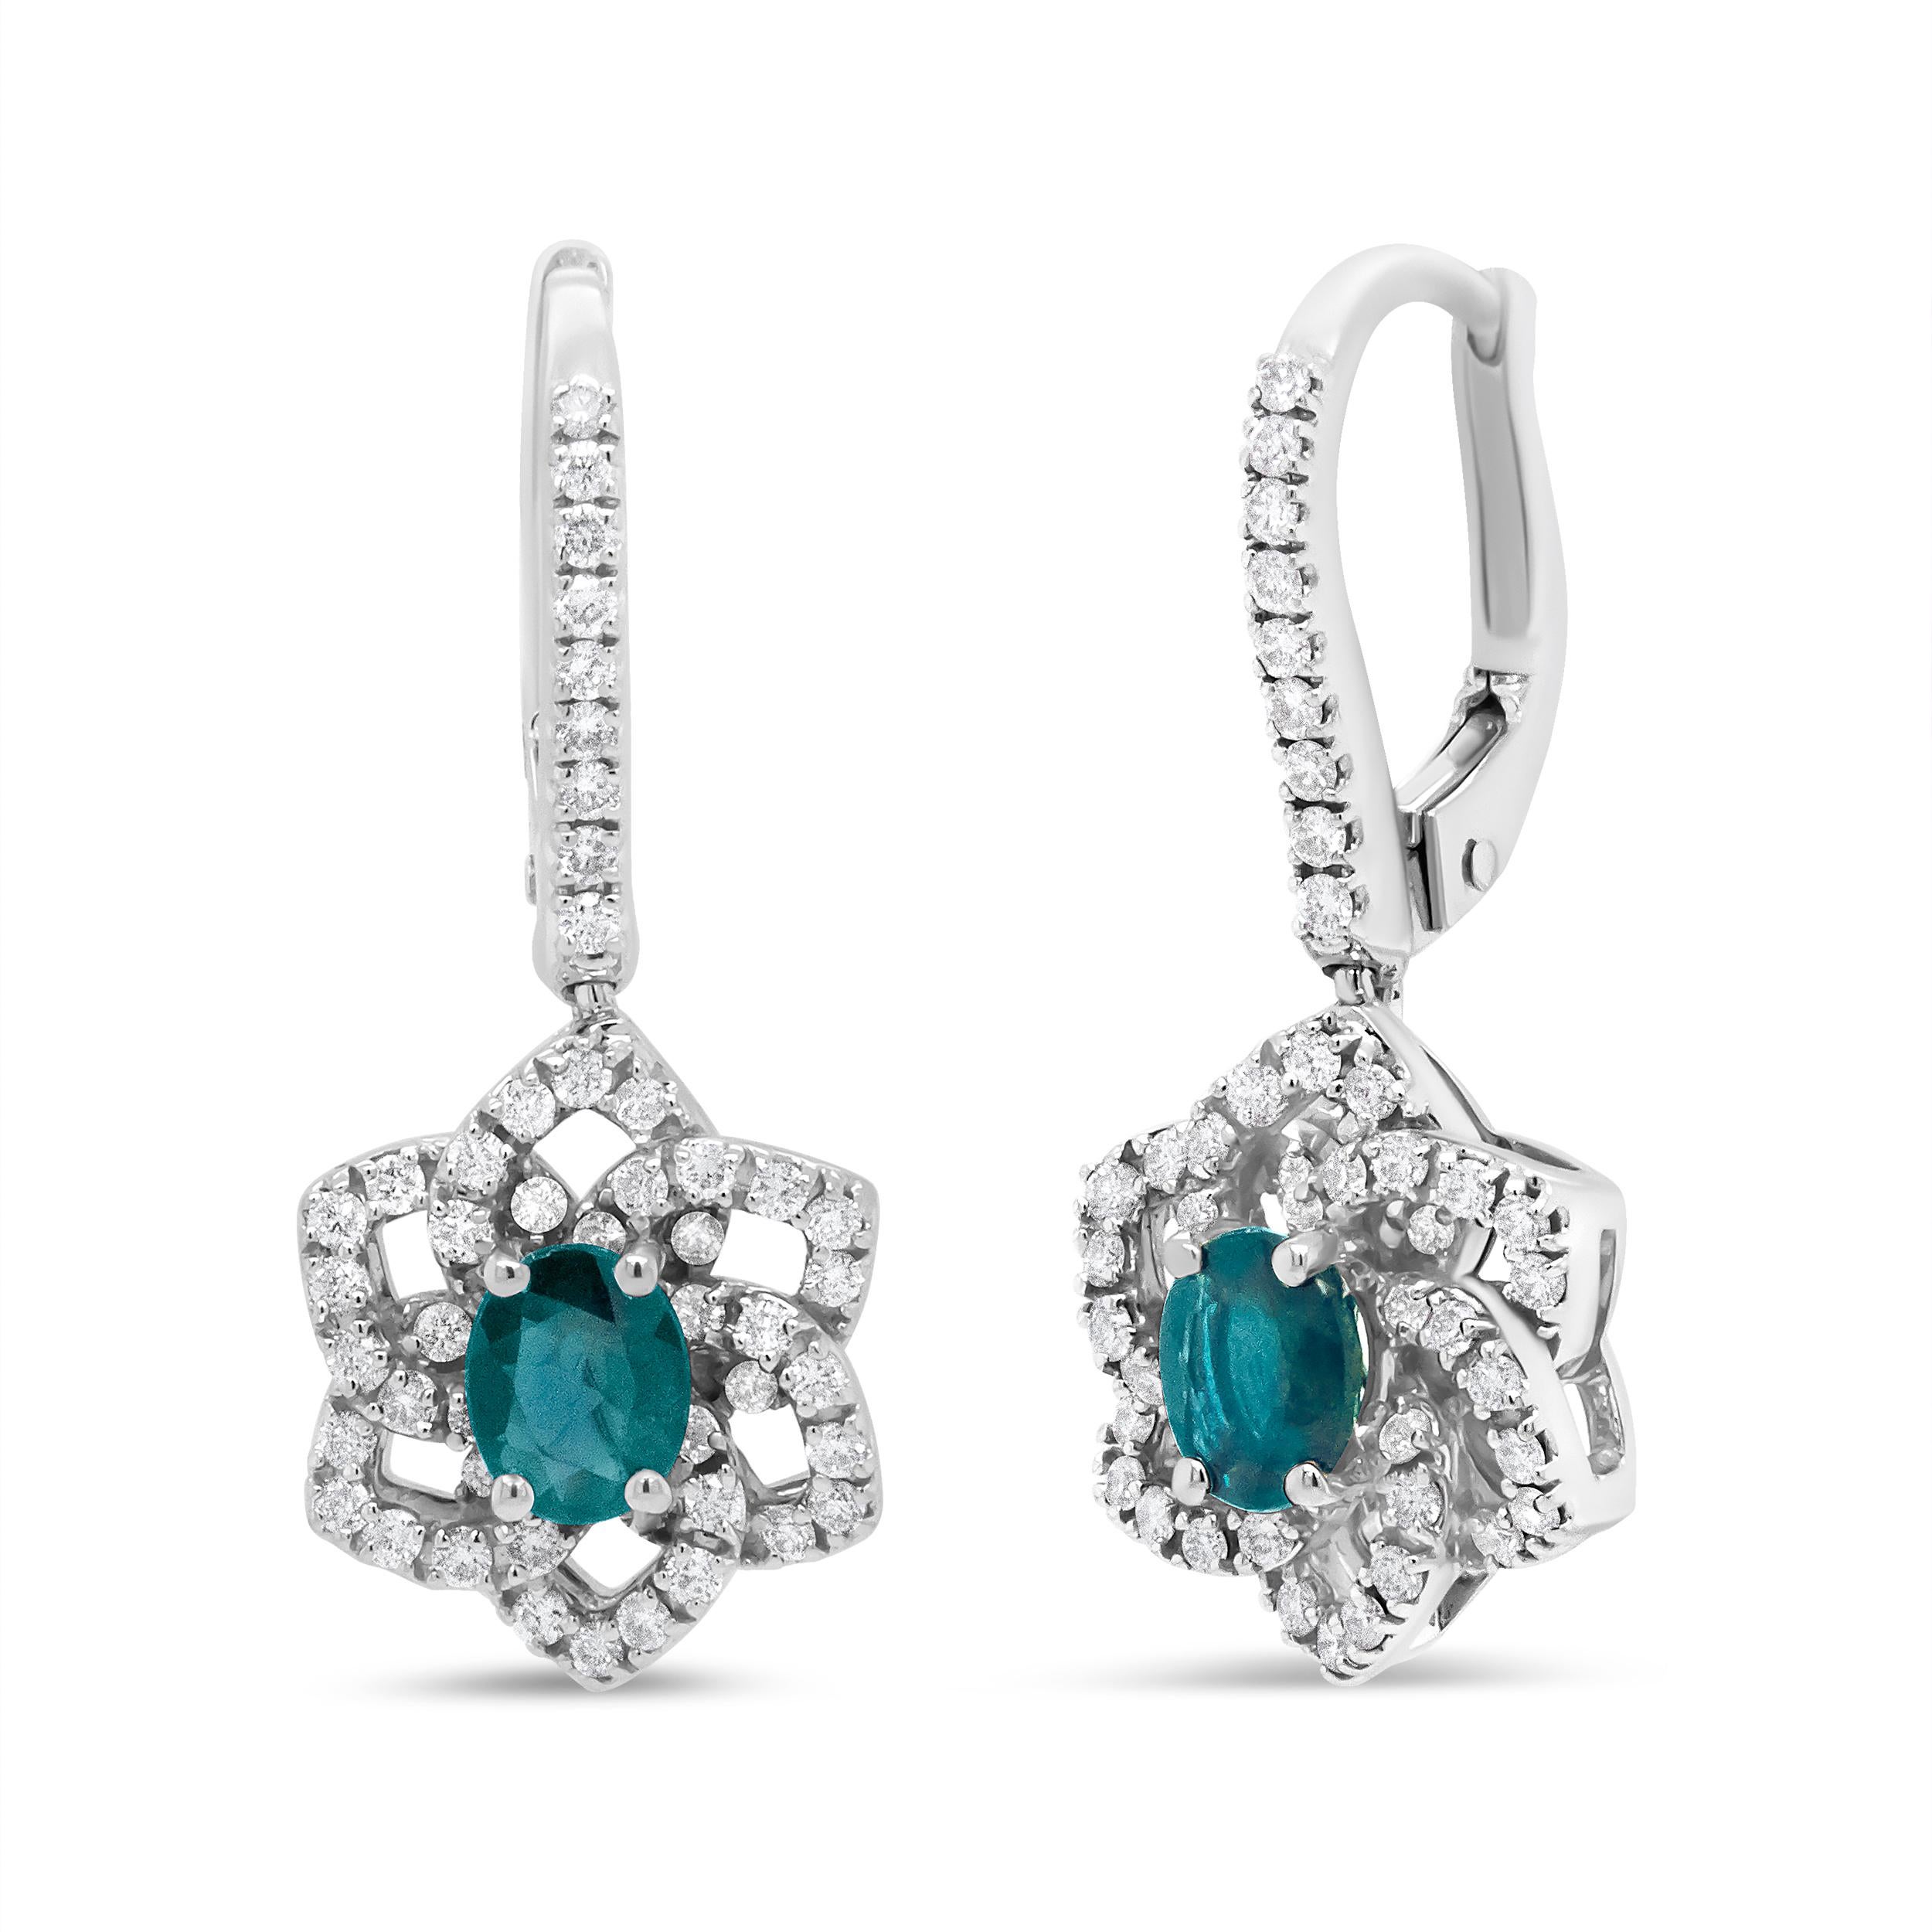 Electrifying color sparkles from this pair of 18k white gold dangle drop earrings in the form of a blazing blue 4.94 x 3.96mm oval sapphire in a 4-prong setting. These are natural, color-treated gemstones of dazzling sparkle. A starburst silhouette